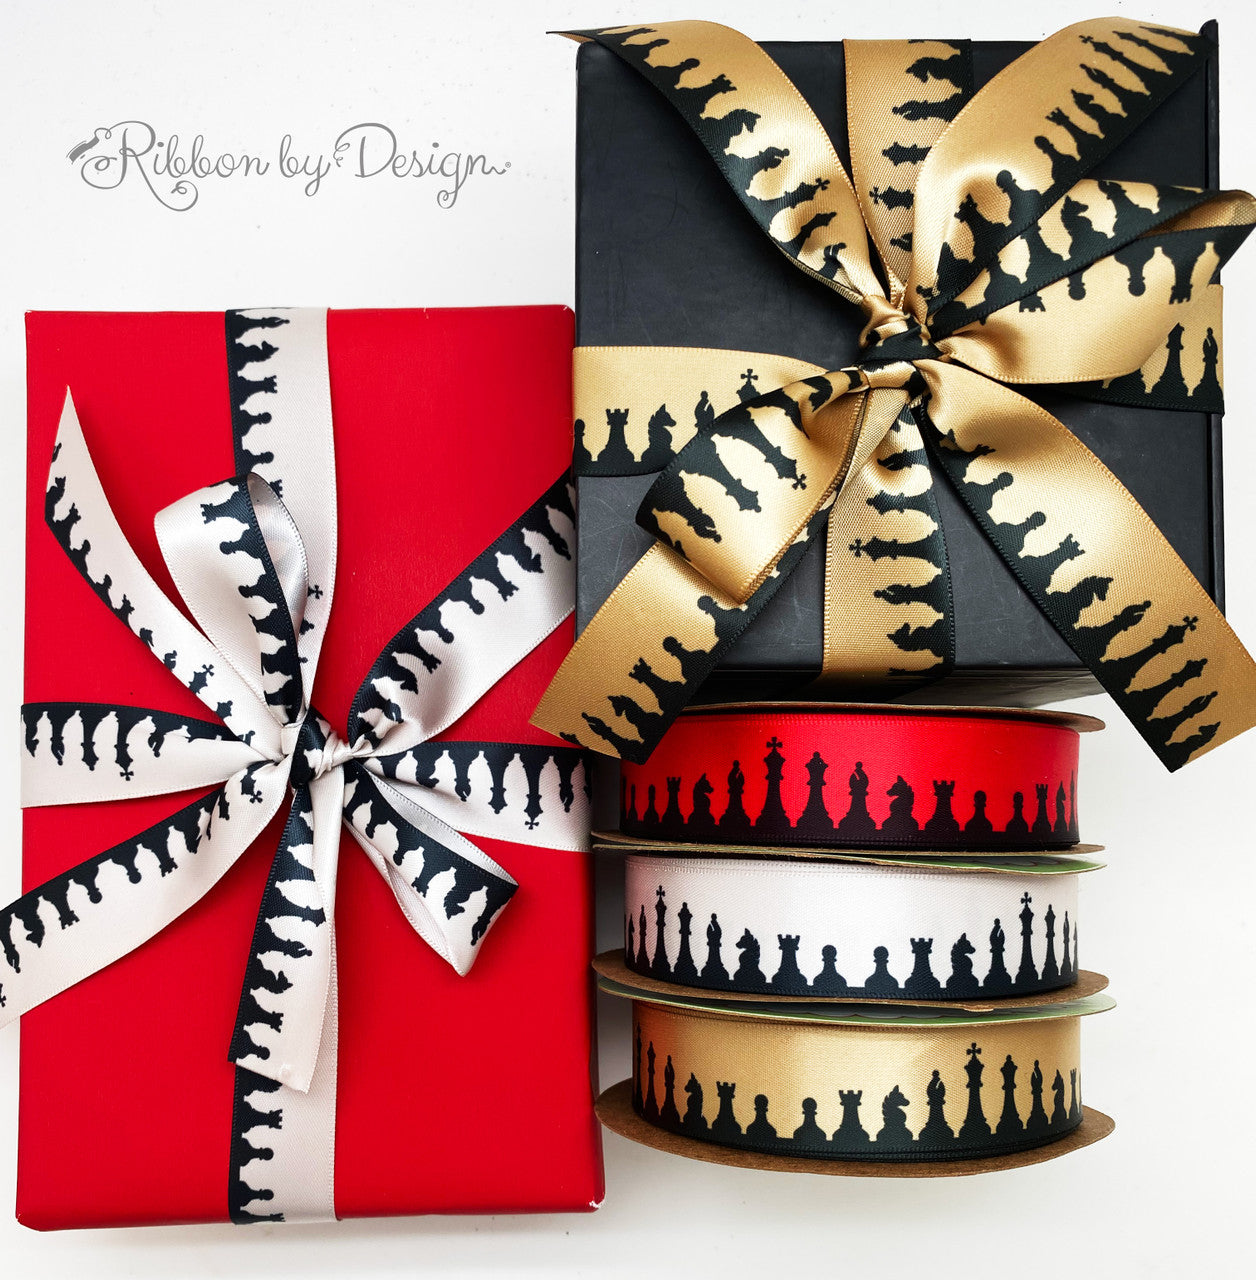 These beauties make for a great gift wrap for the chess player in your life.